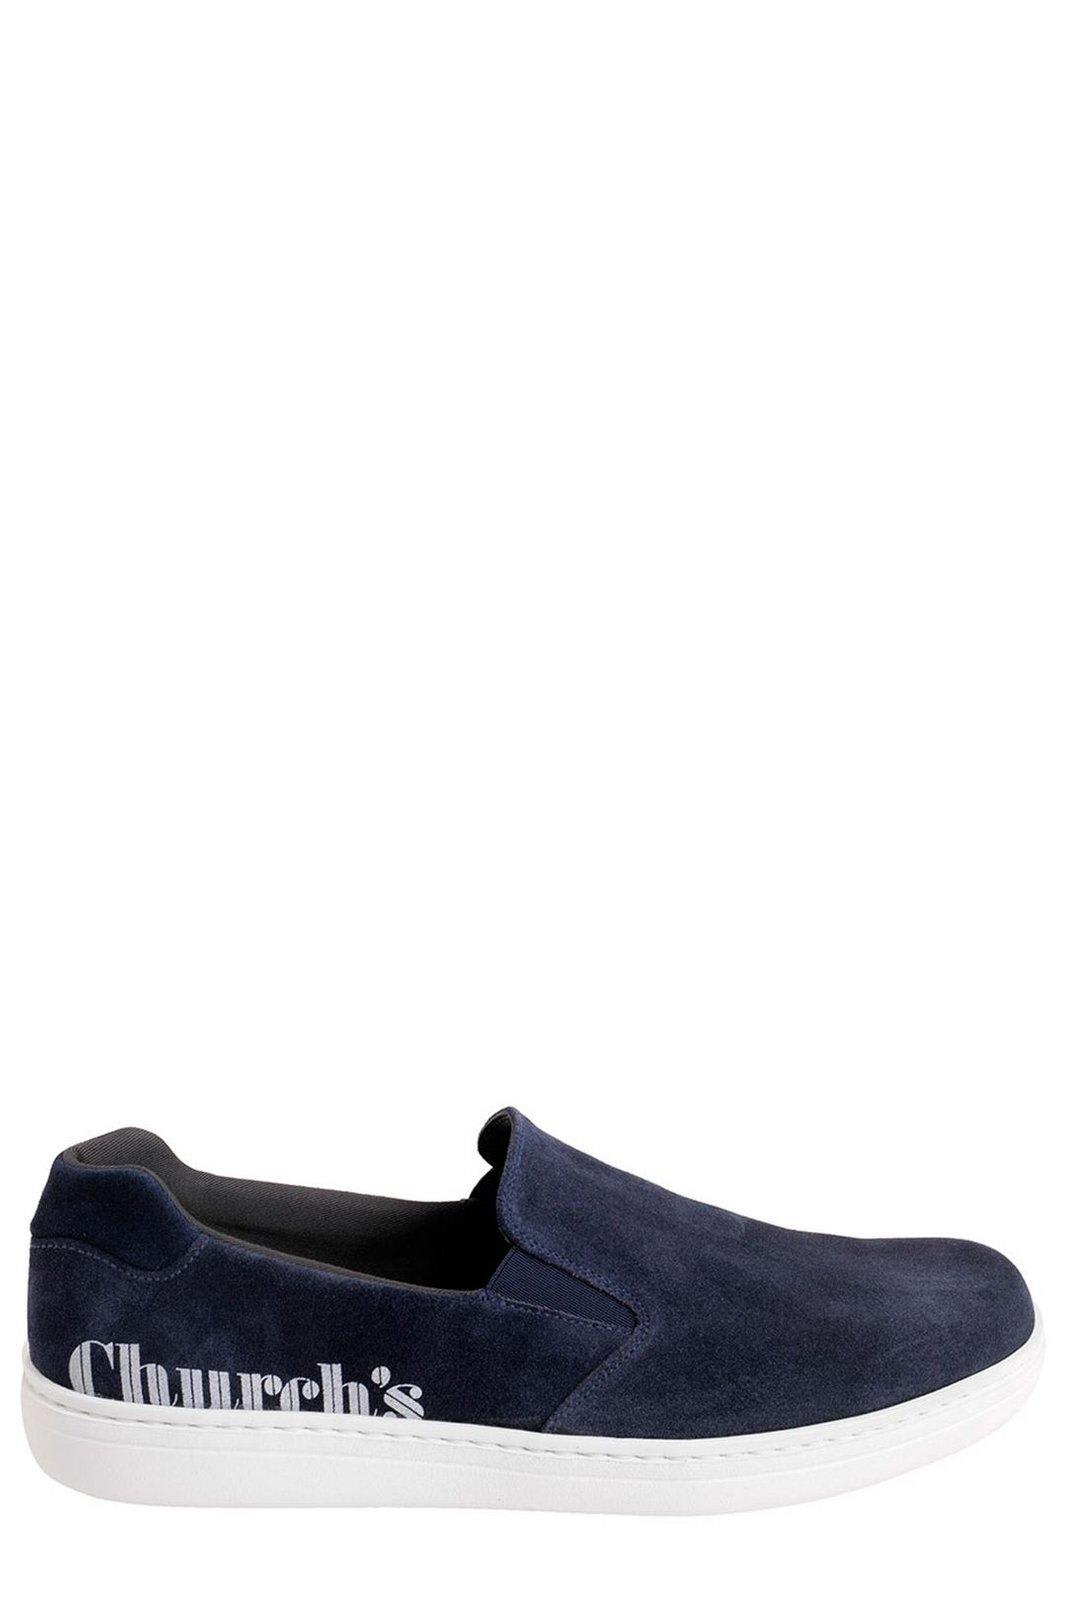 Fawley Slip-on Loafers Loafers